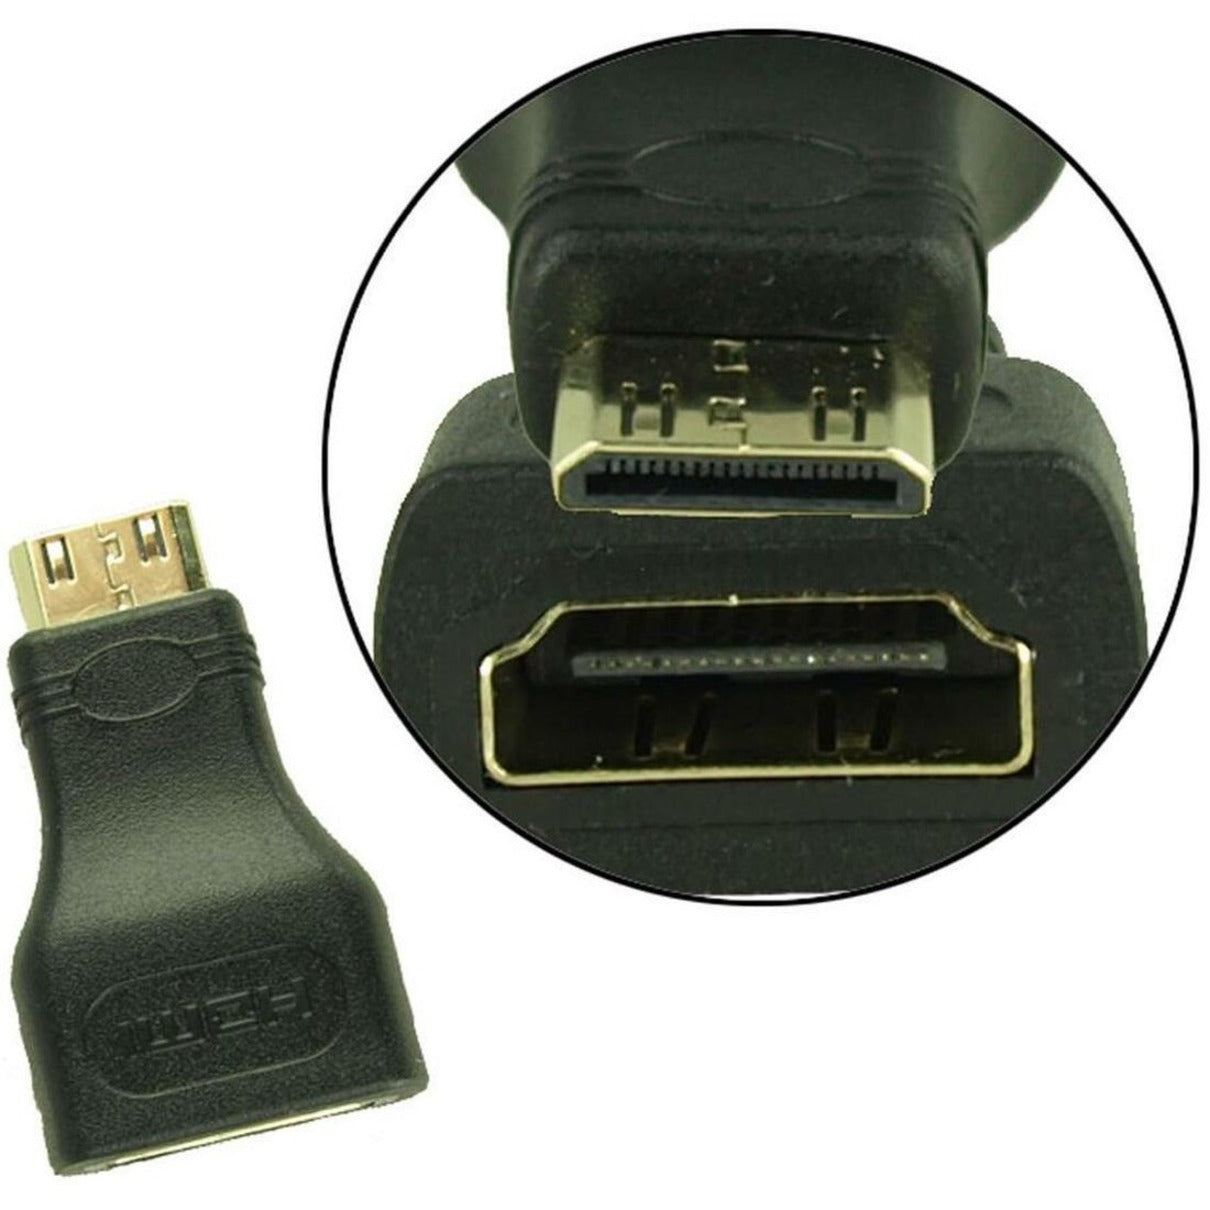 4XEM 4XHDMIMINI15FT 15FT Mini HDMI To HDMI M/M Adapter Cable, 10.2 Gbit/s Data Transfer Rate, Gold Plated Connectors